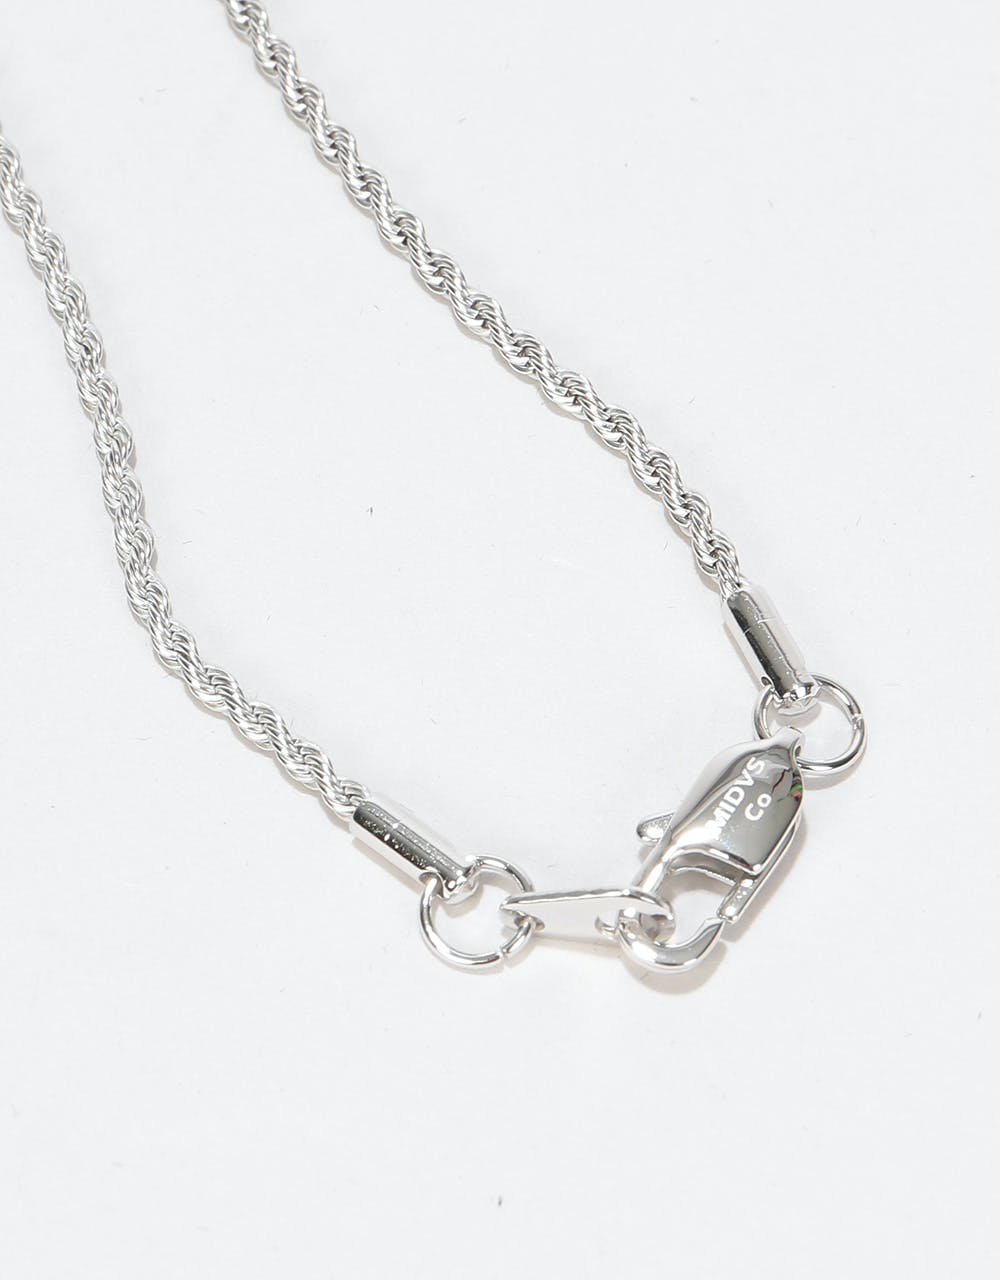 Midvs Co 22" Rope Chain Necklace - White Gold